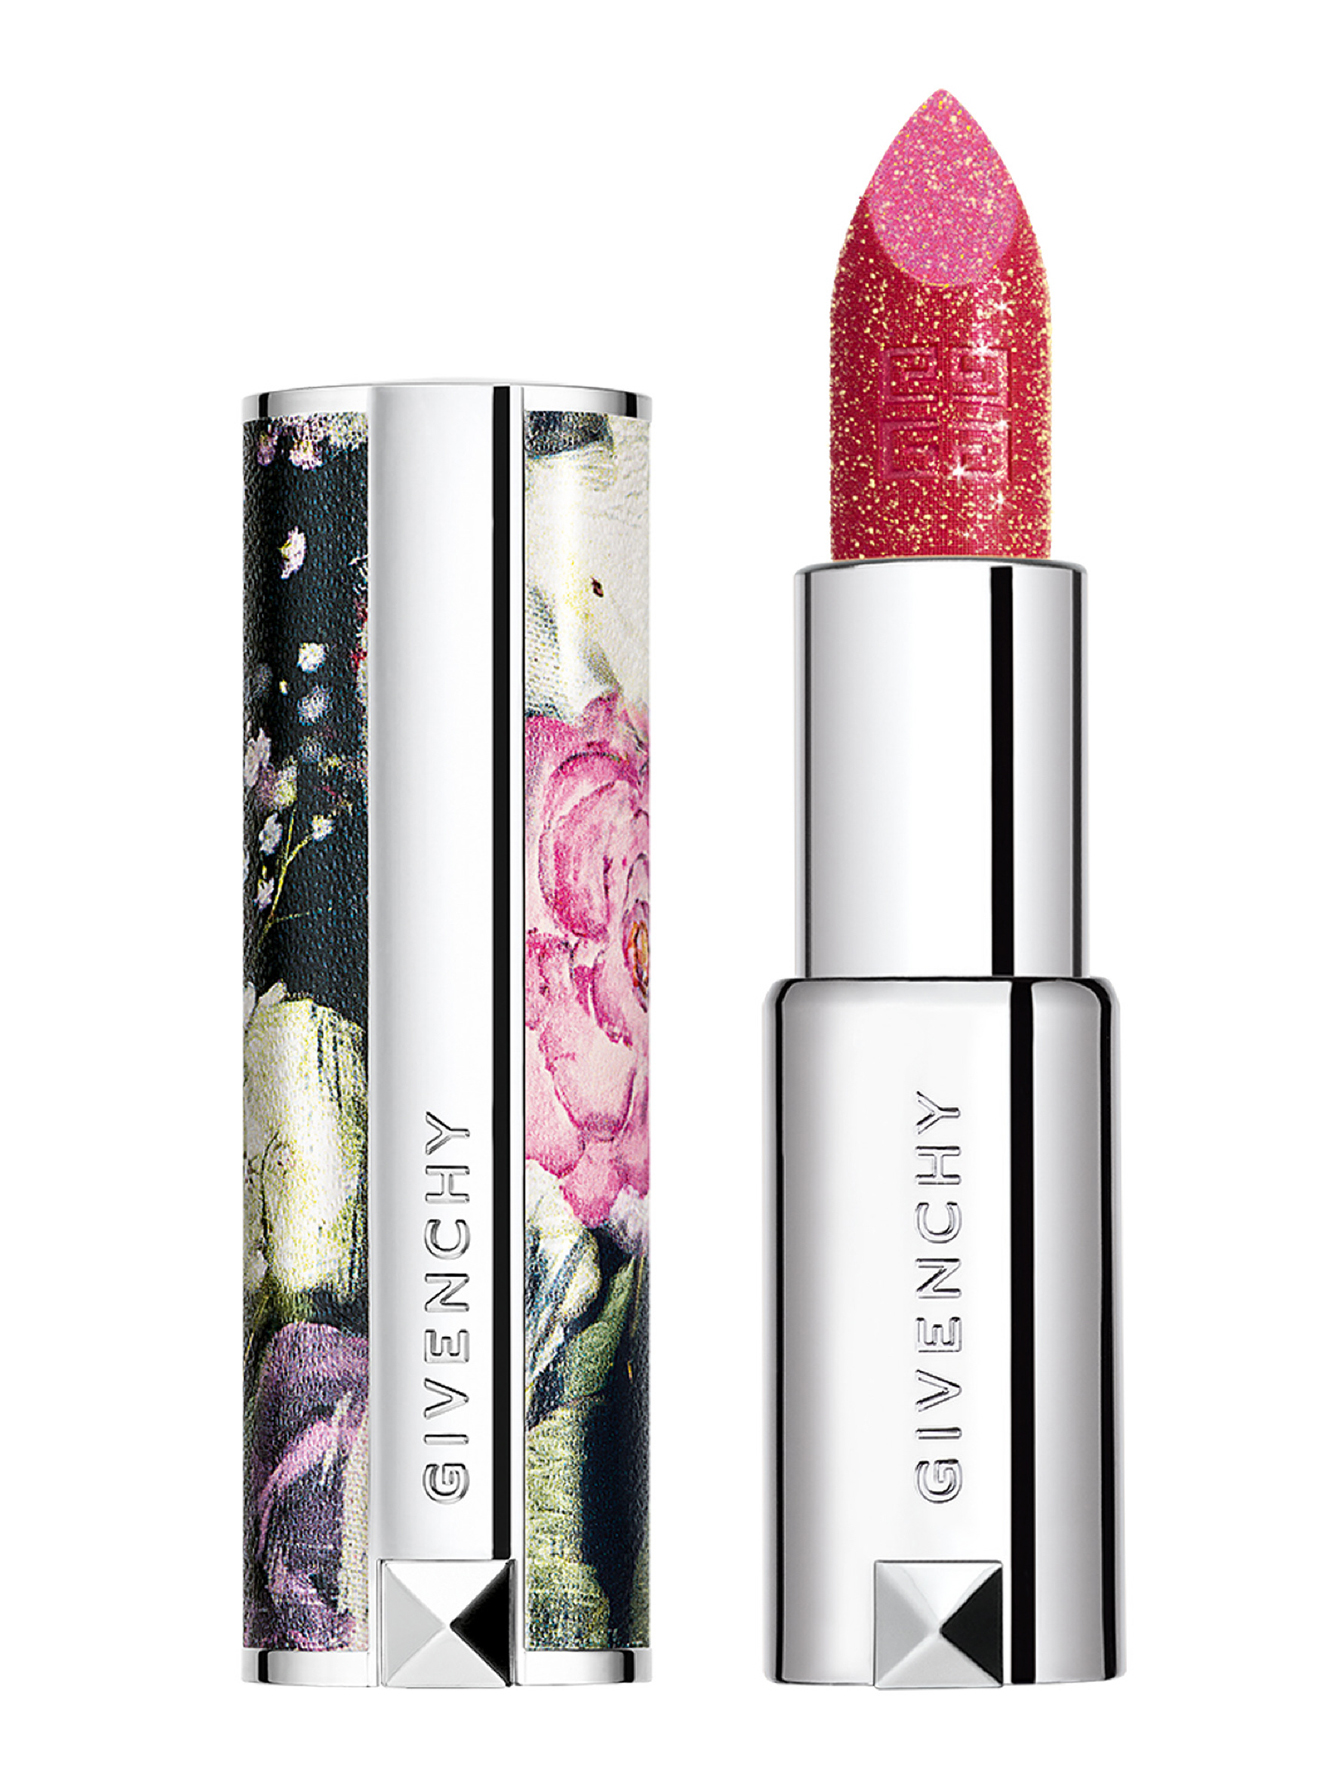 Губная помада givenchy. Givenchy le rouge Gardens Edition 01. Помада Givenchy le rouge. Givenchy Gardens Edition le rouge Lipstick. Помада Givenchy le rouge 001.